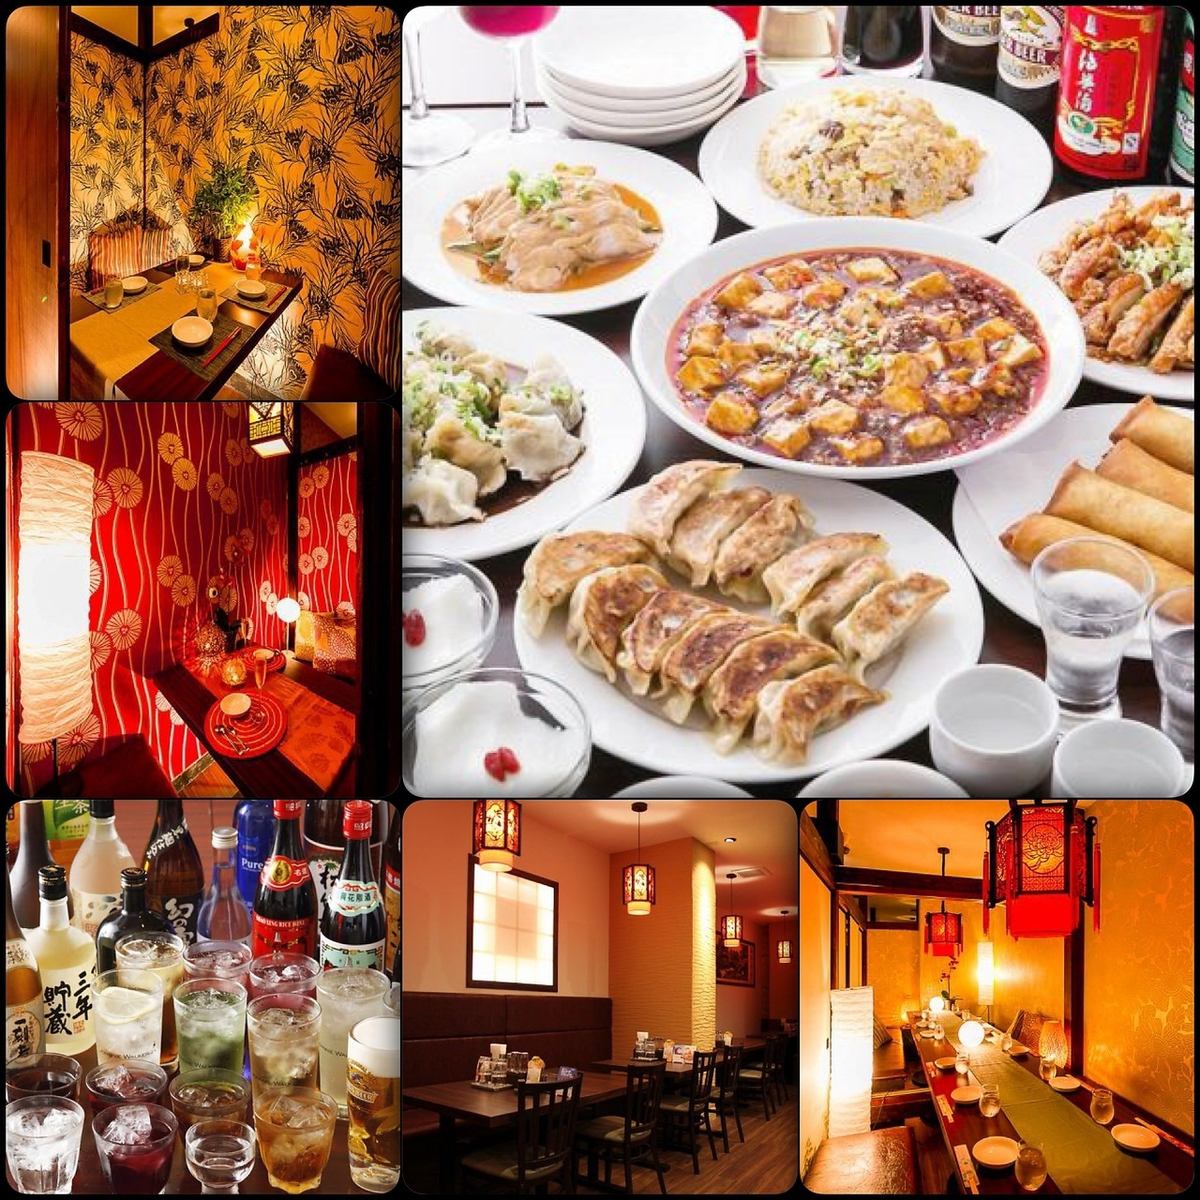 [There is a complete private room] All-you-can-eat Chinese food is 3,580 yen!